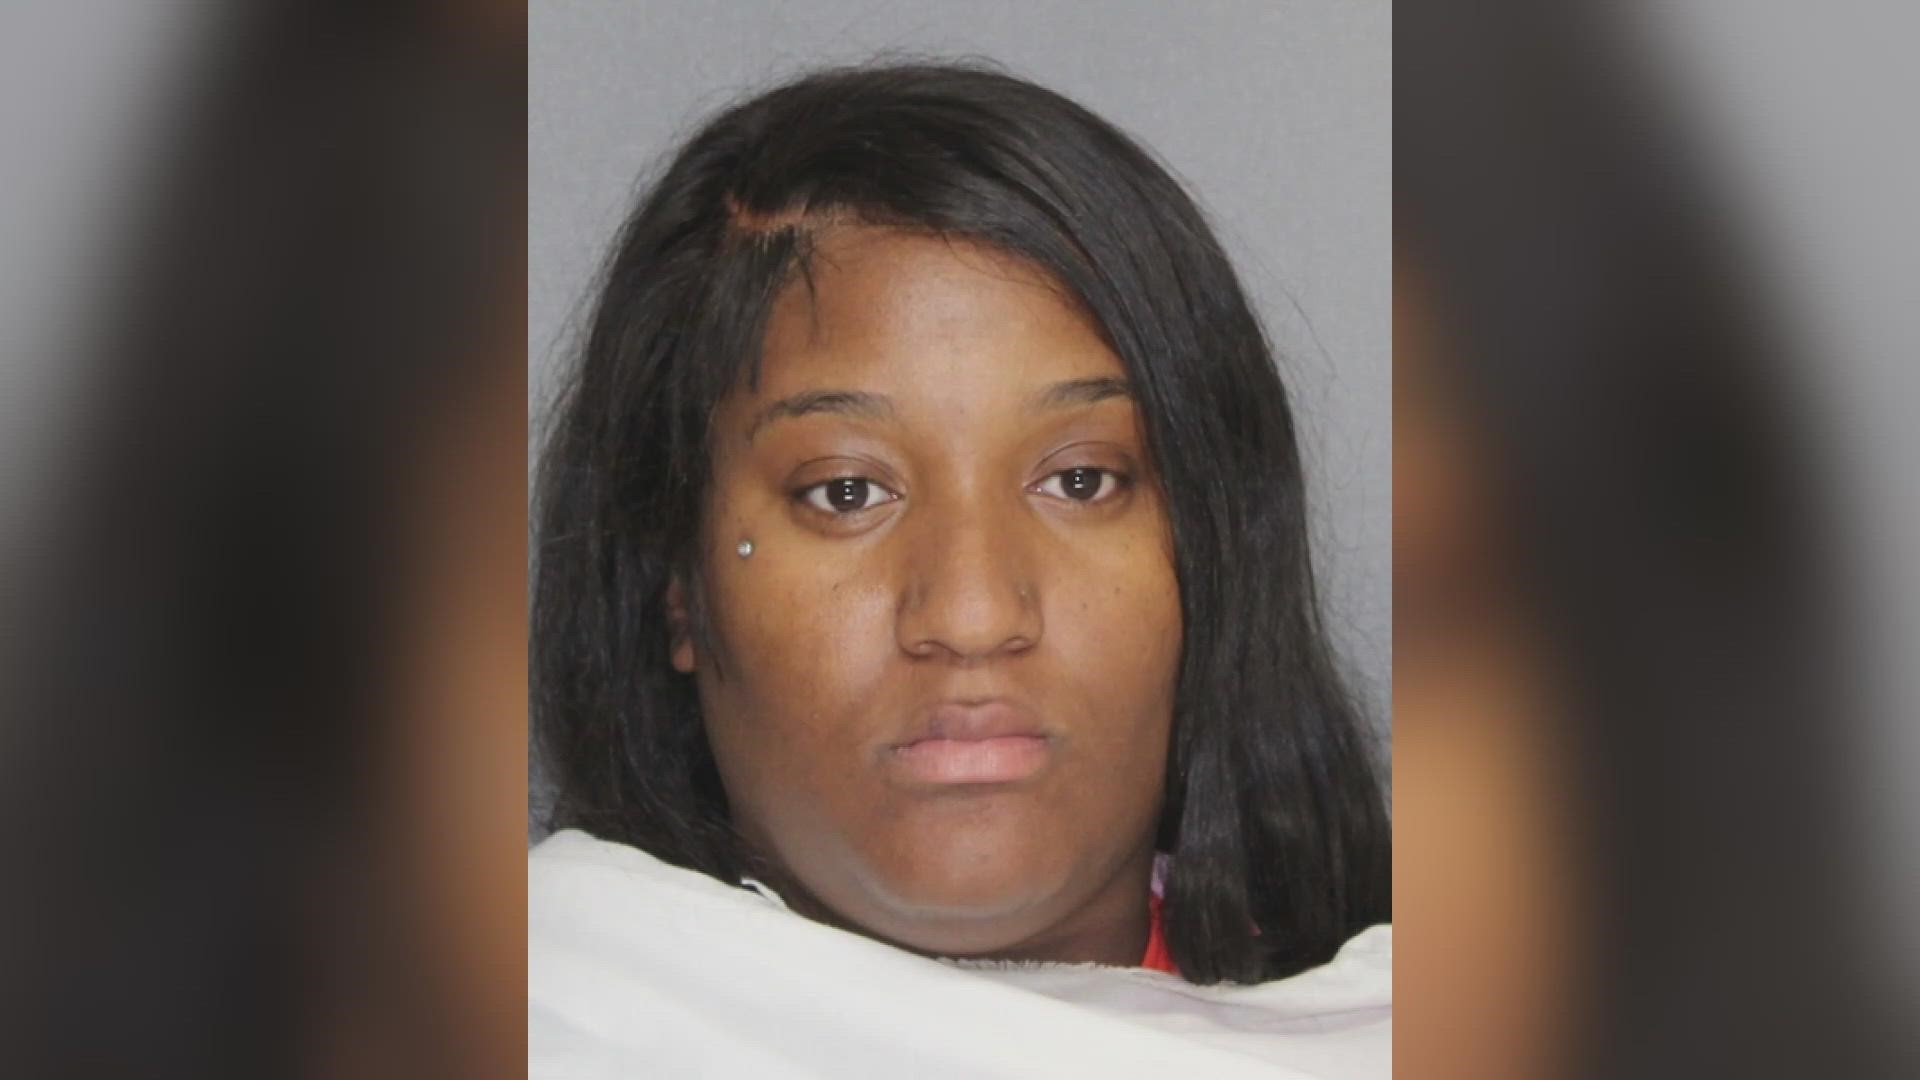 We're learning more about the woman who was arrested for allegedly stabbing her five kids. This is not the first time she's been arrested for stabbing someone.